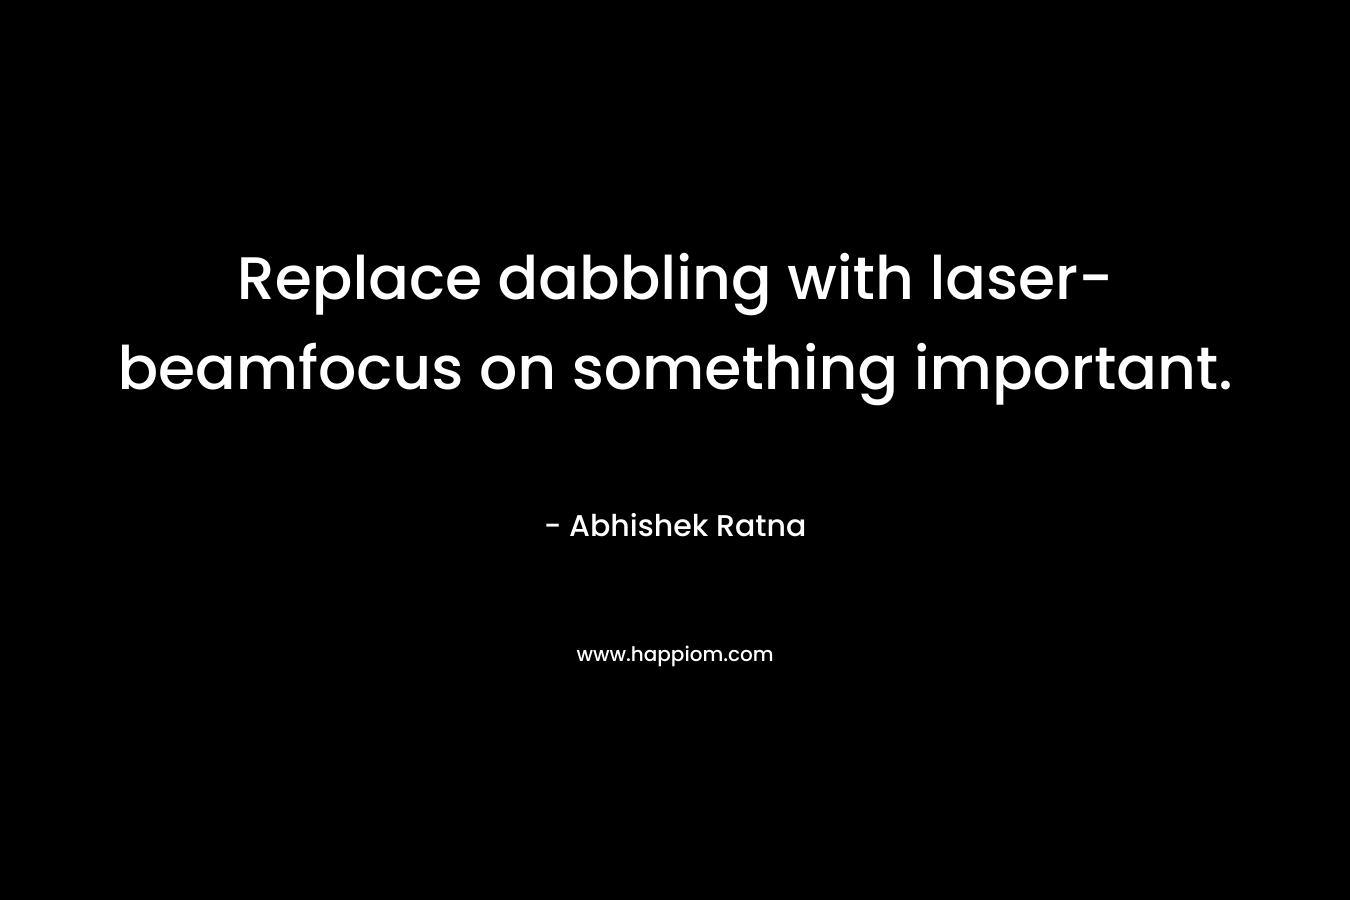 Replace dabbling with laser-beamfocus on something important.